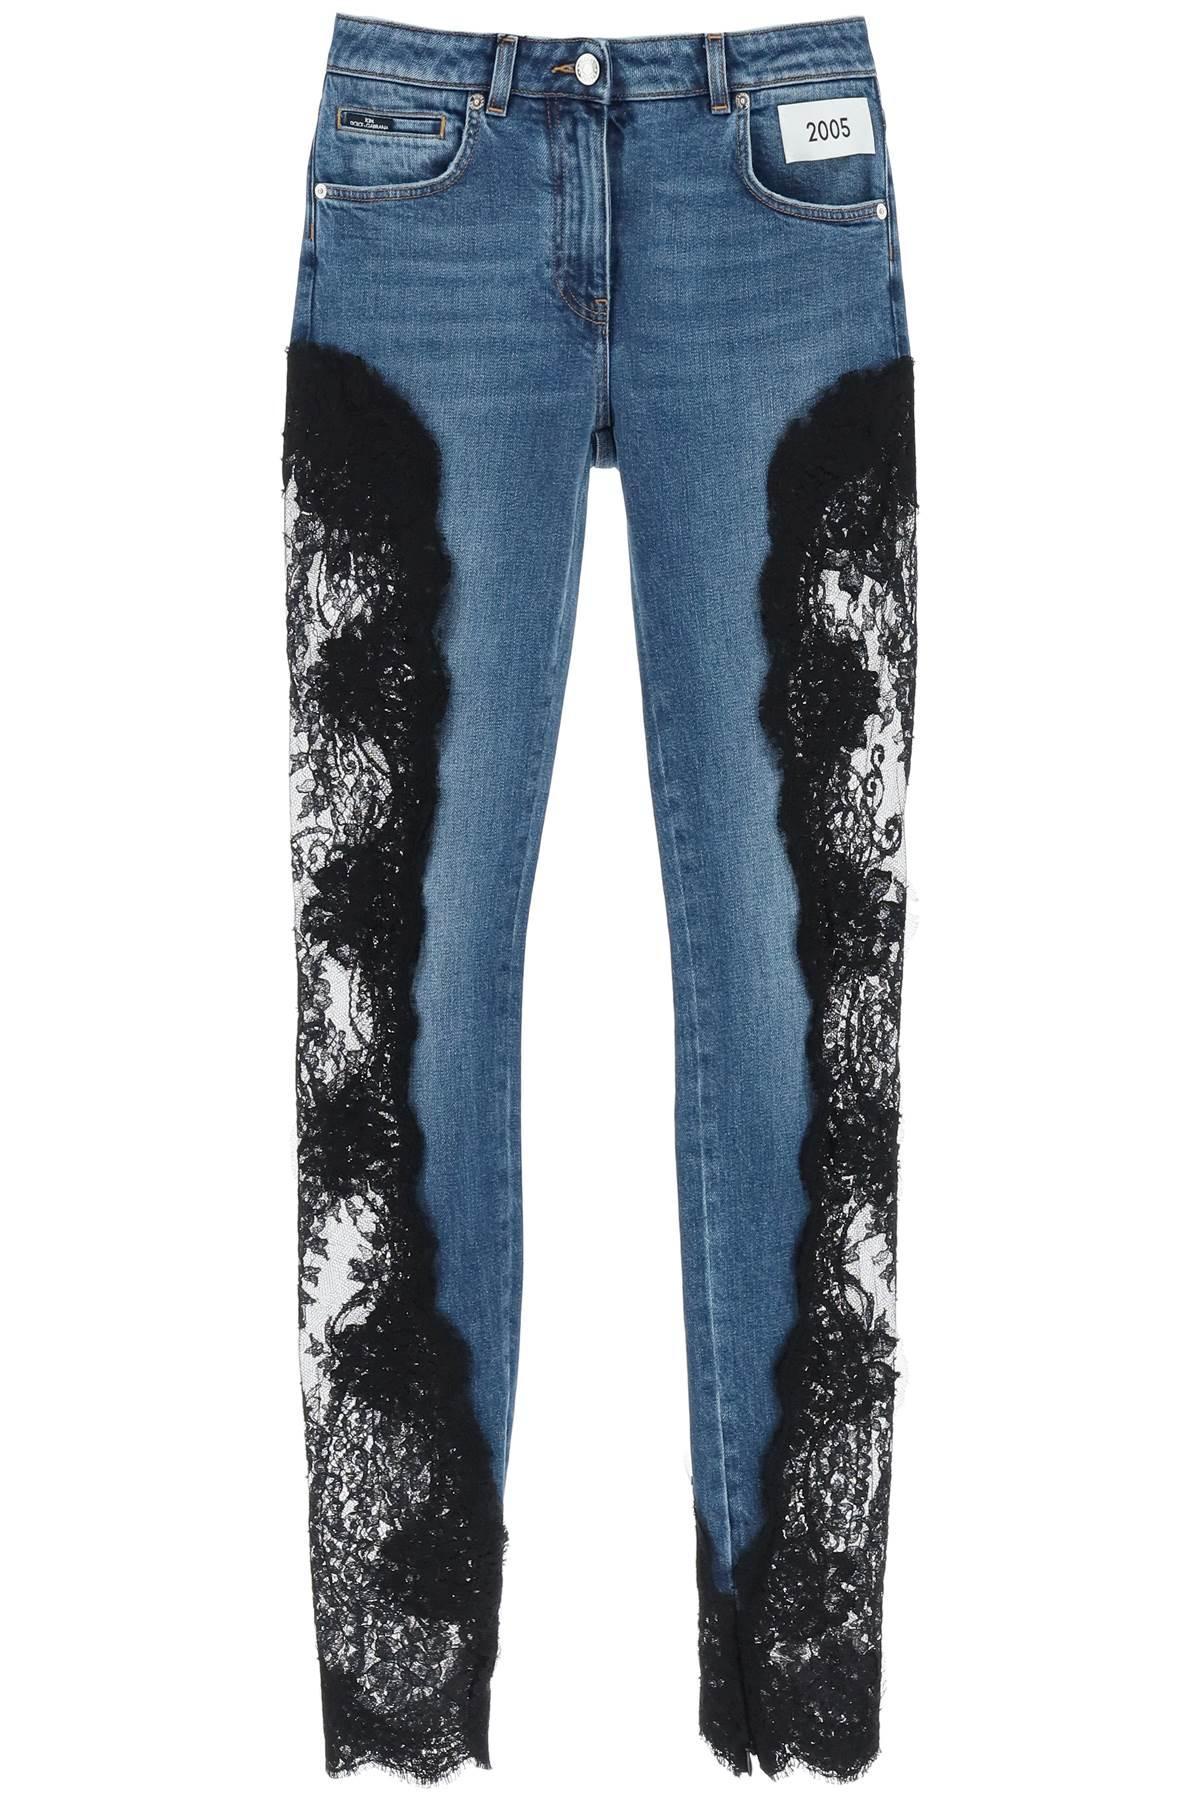 Dolce & Gabbana Slim Fit Jeans With Lace Inserts in Blue | Lyst